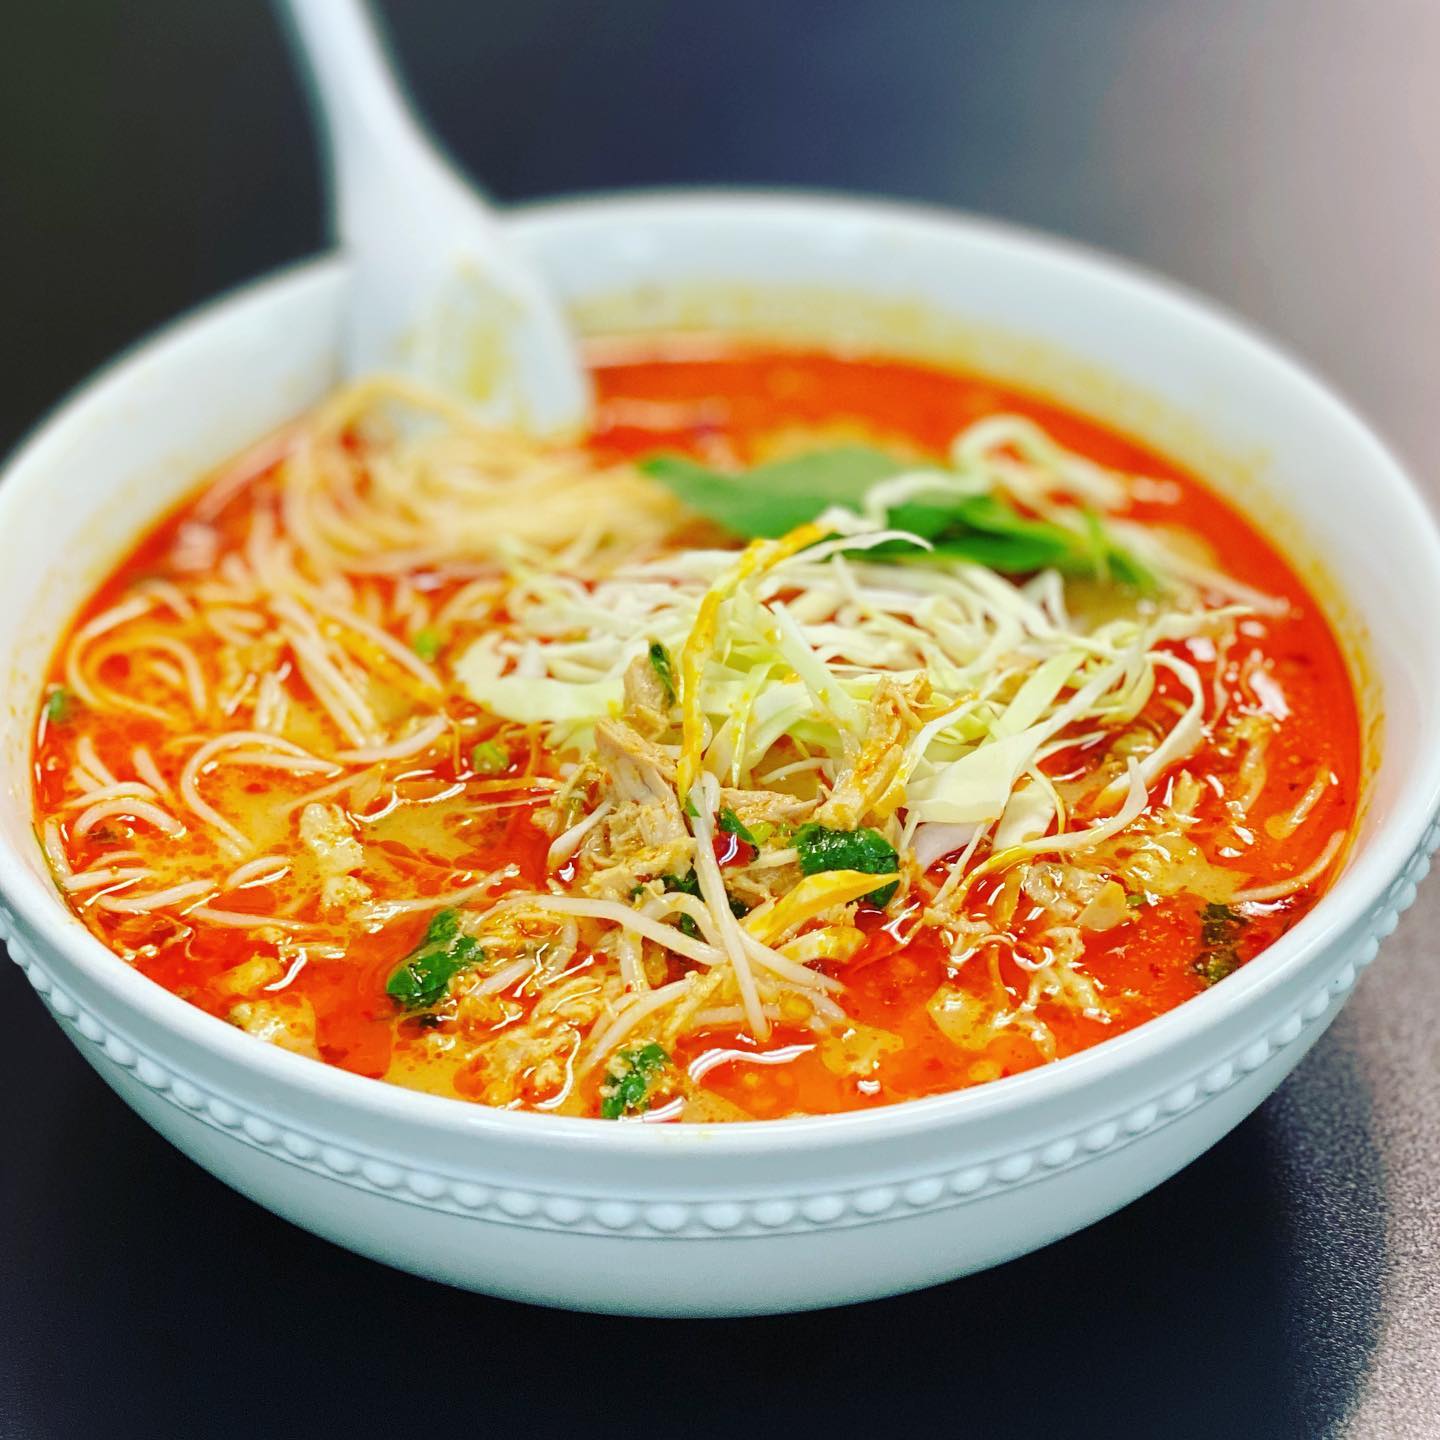 Khao poon is a popular type of spicy Lao rice vermicelli soup